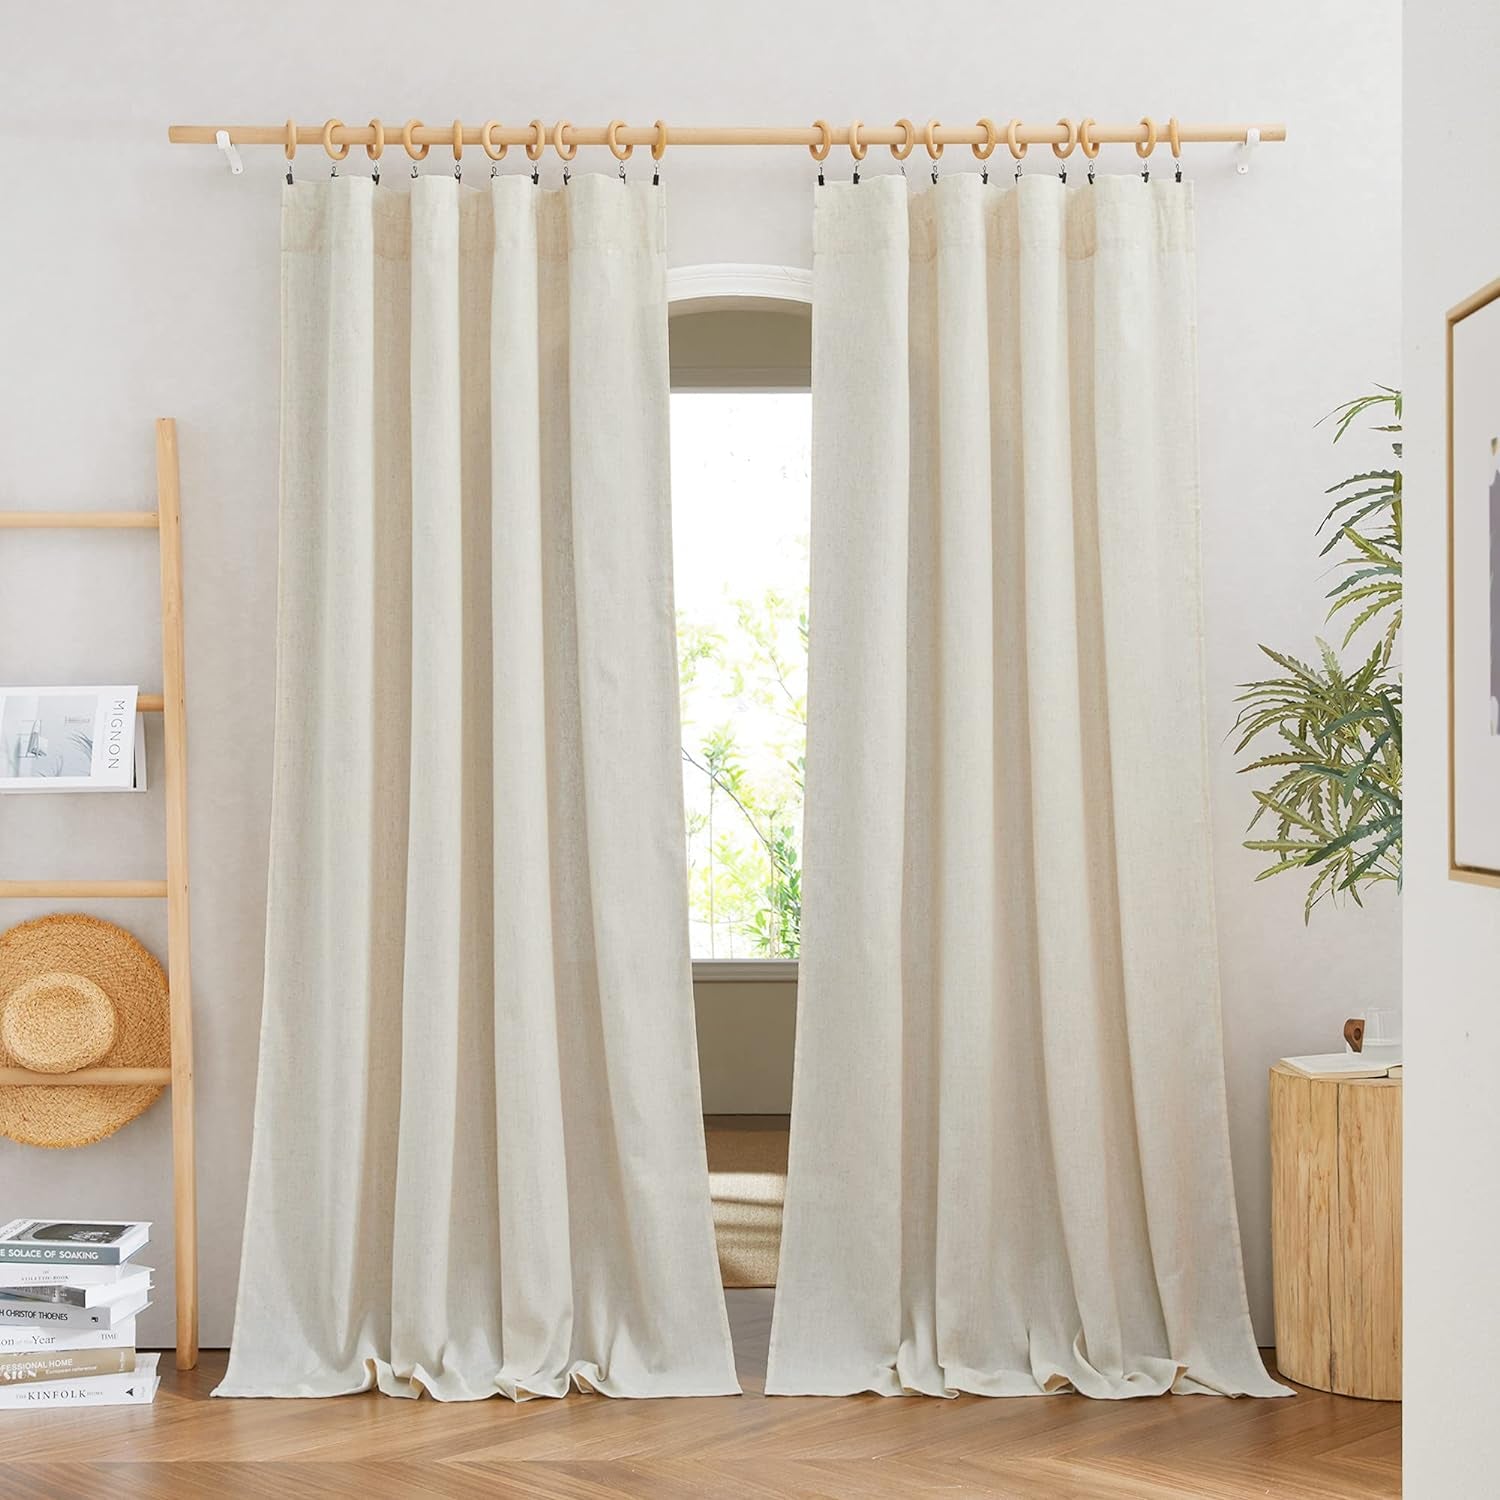 NICETOWN Natural Linen Curtains & Drapes for Windows 84 Inch Long, Rod Pocket Thick Flax Semi Sheer Privacy Assured with Light Filtering for Bedroom/Living Room, W55 X L84, 2 Pieces  NICETOWN Natural W55 X L84 